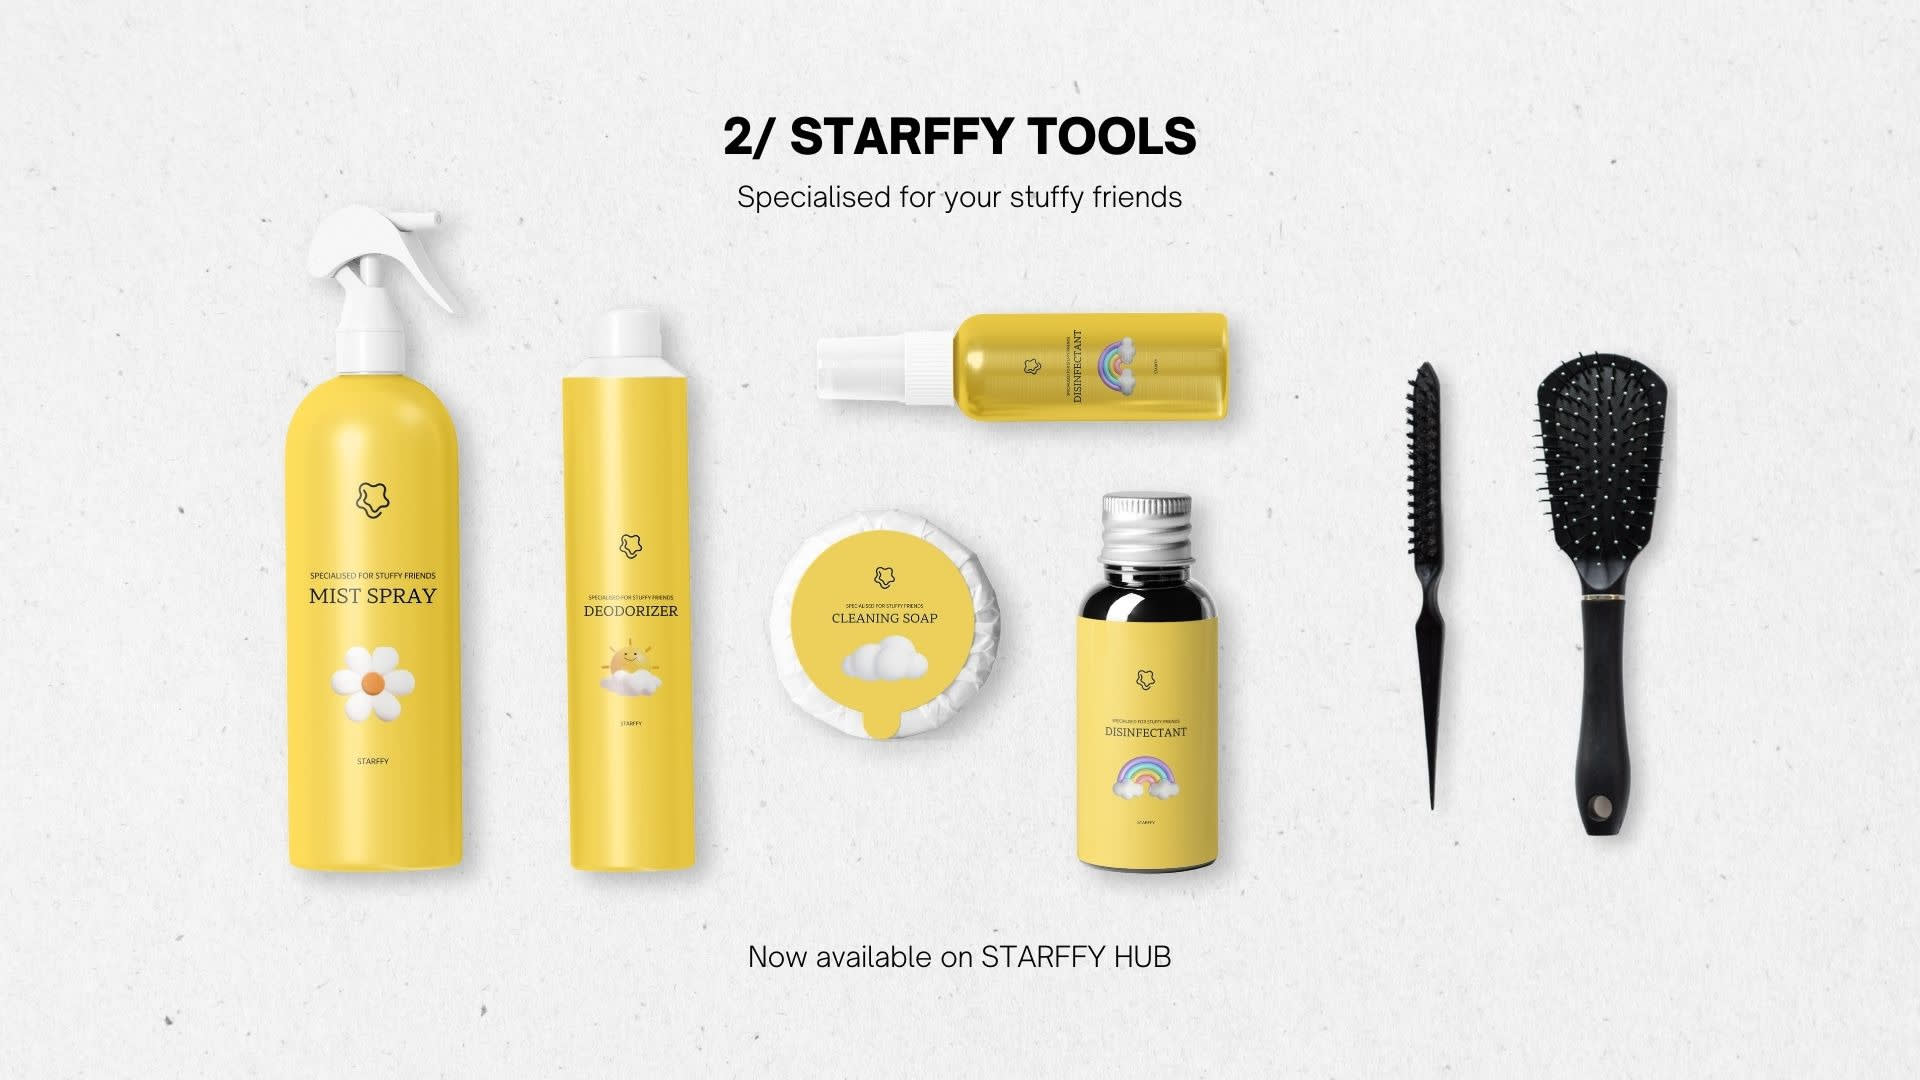 STARYYF tools are specialised for your stuffy friends